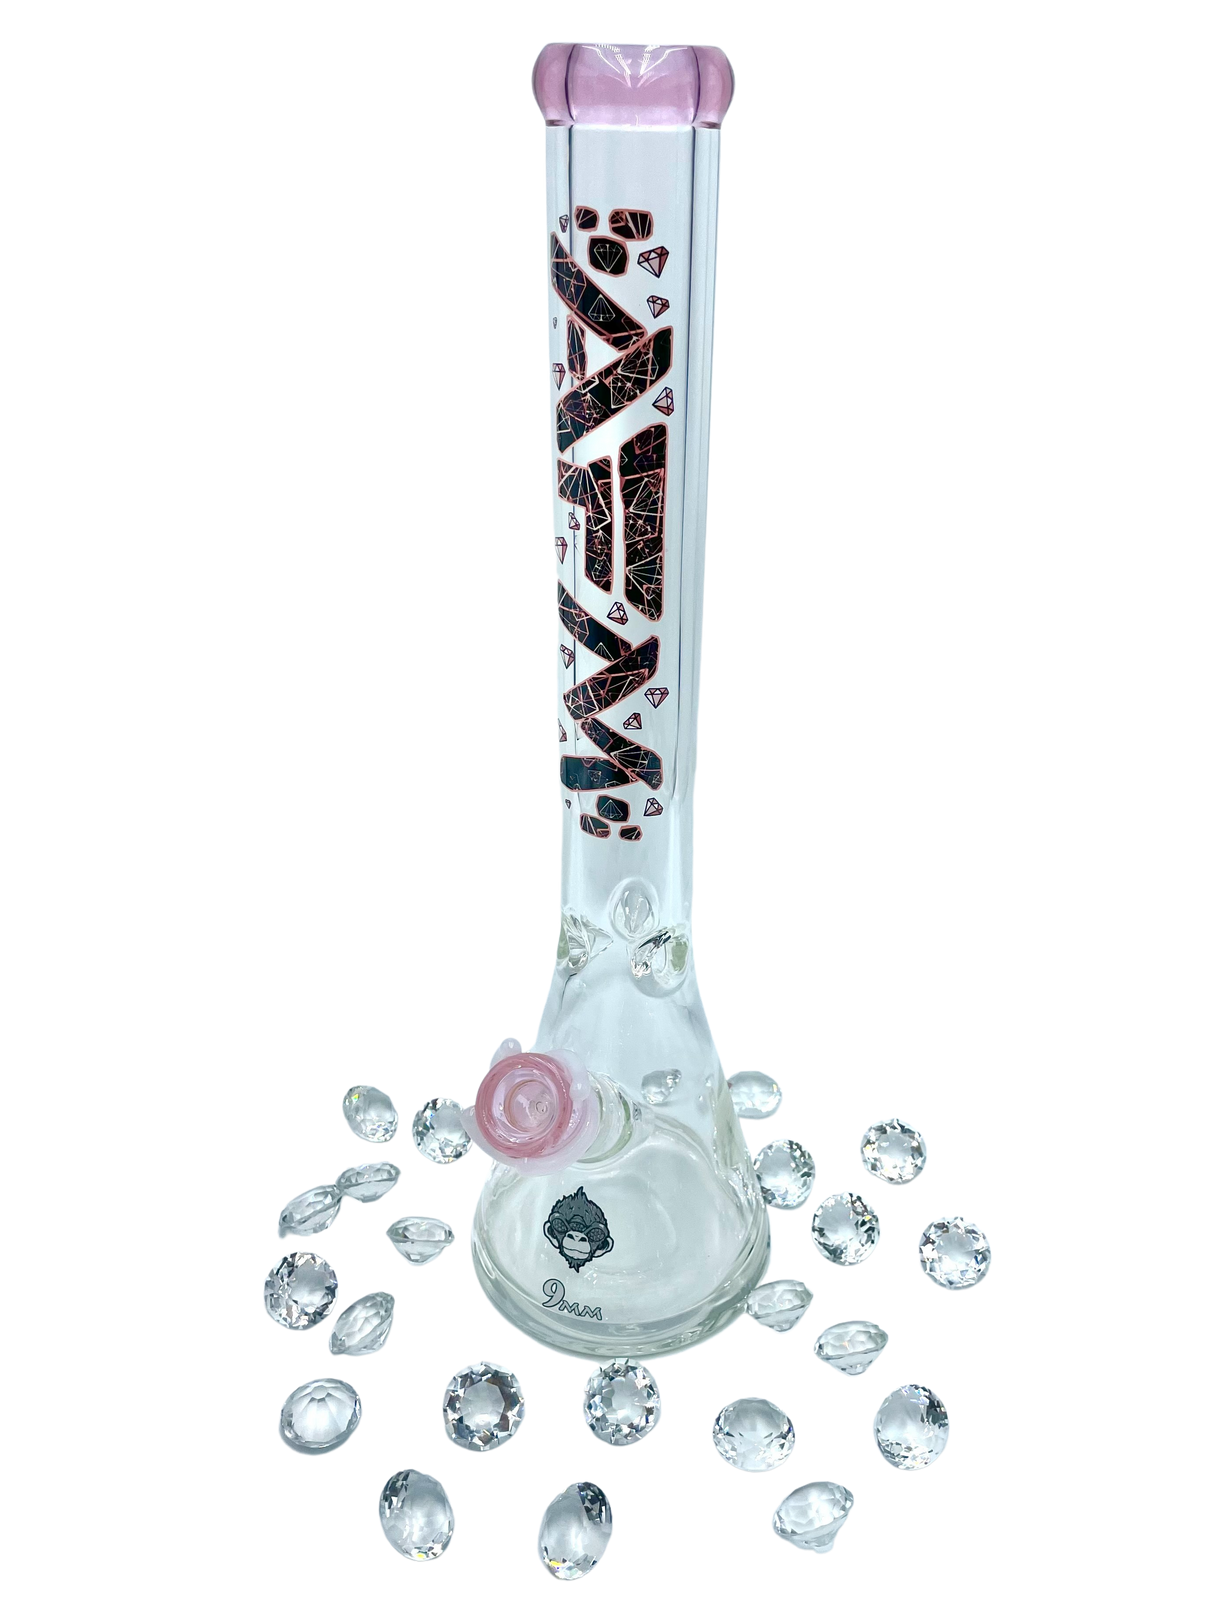 AFM The Pink Diamond Beaker Bong, 9mm thick glass, 18" tall, front view on white background